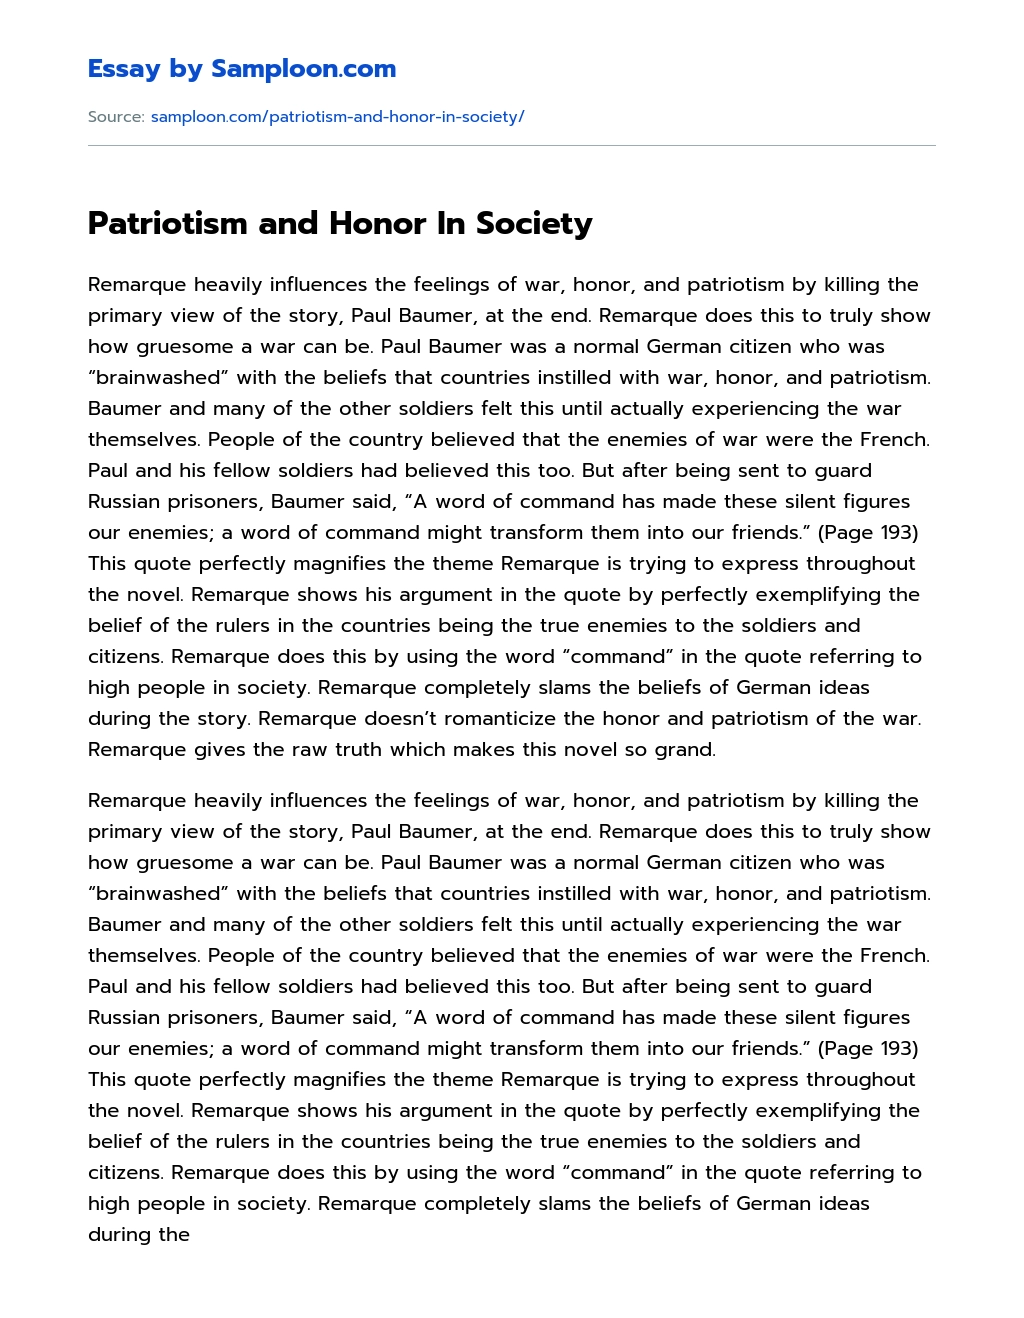 Patriotism and Honor In Society essay